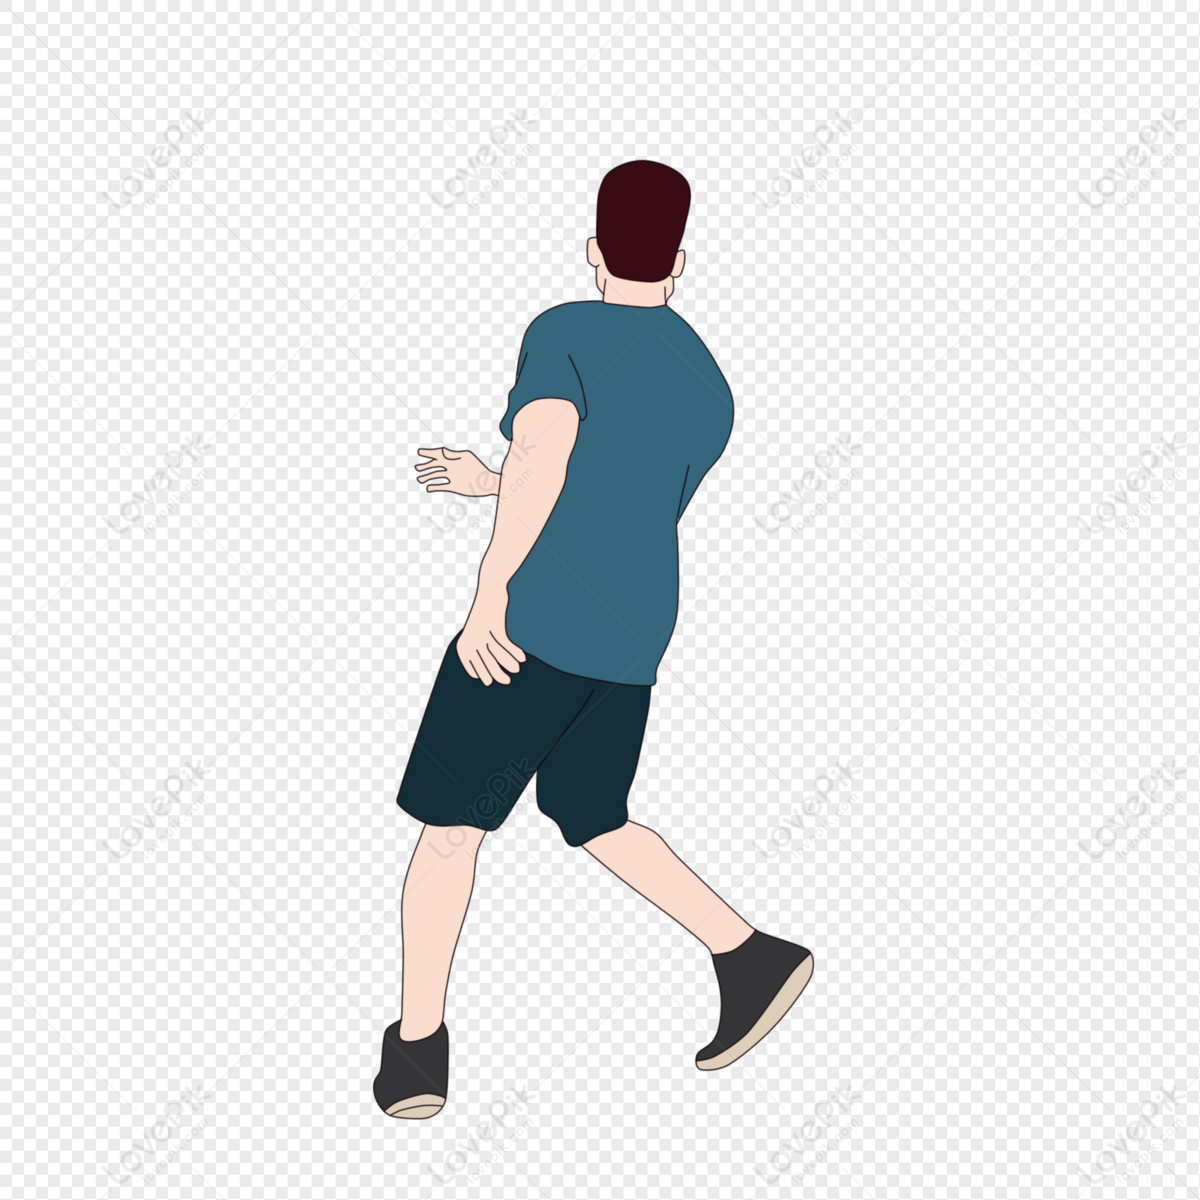 Cartoon Player PNG Picture And Clipart Image For Free Download - Lovepik |  401219055